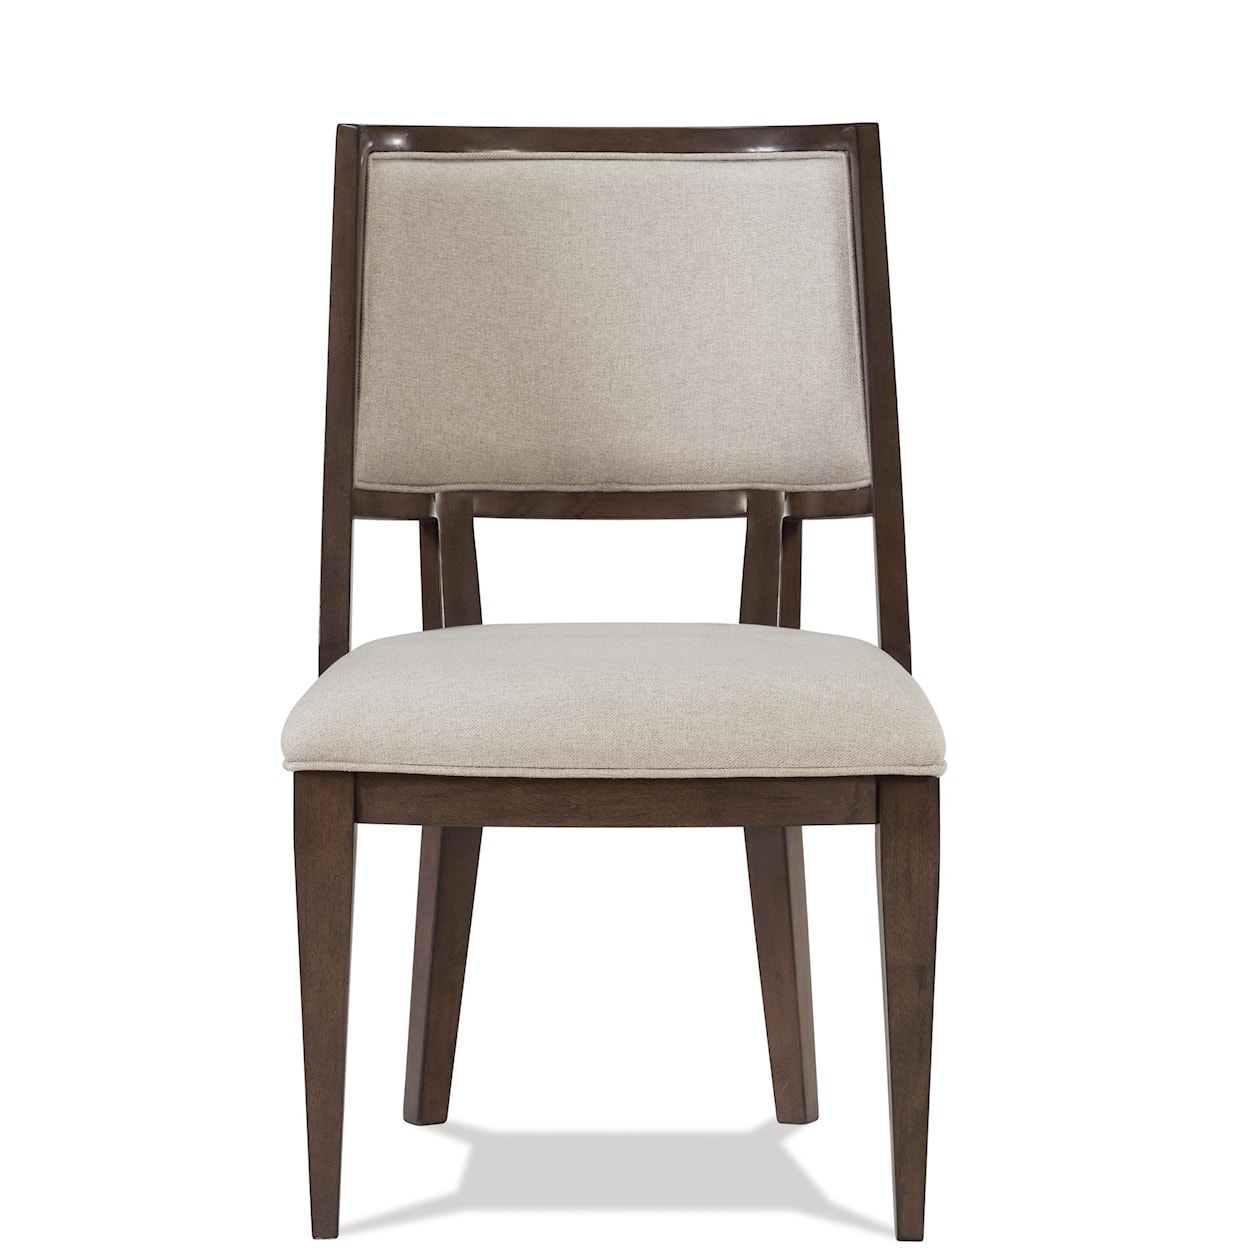 Riverside Furniture Getry Gentry Upholstered Hostess Chair